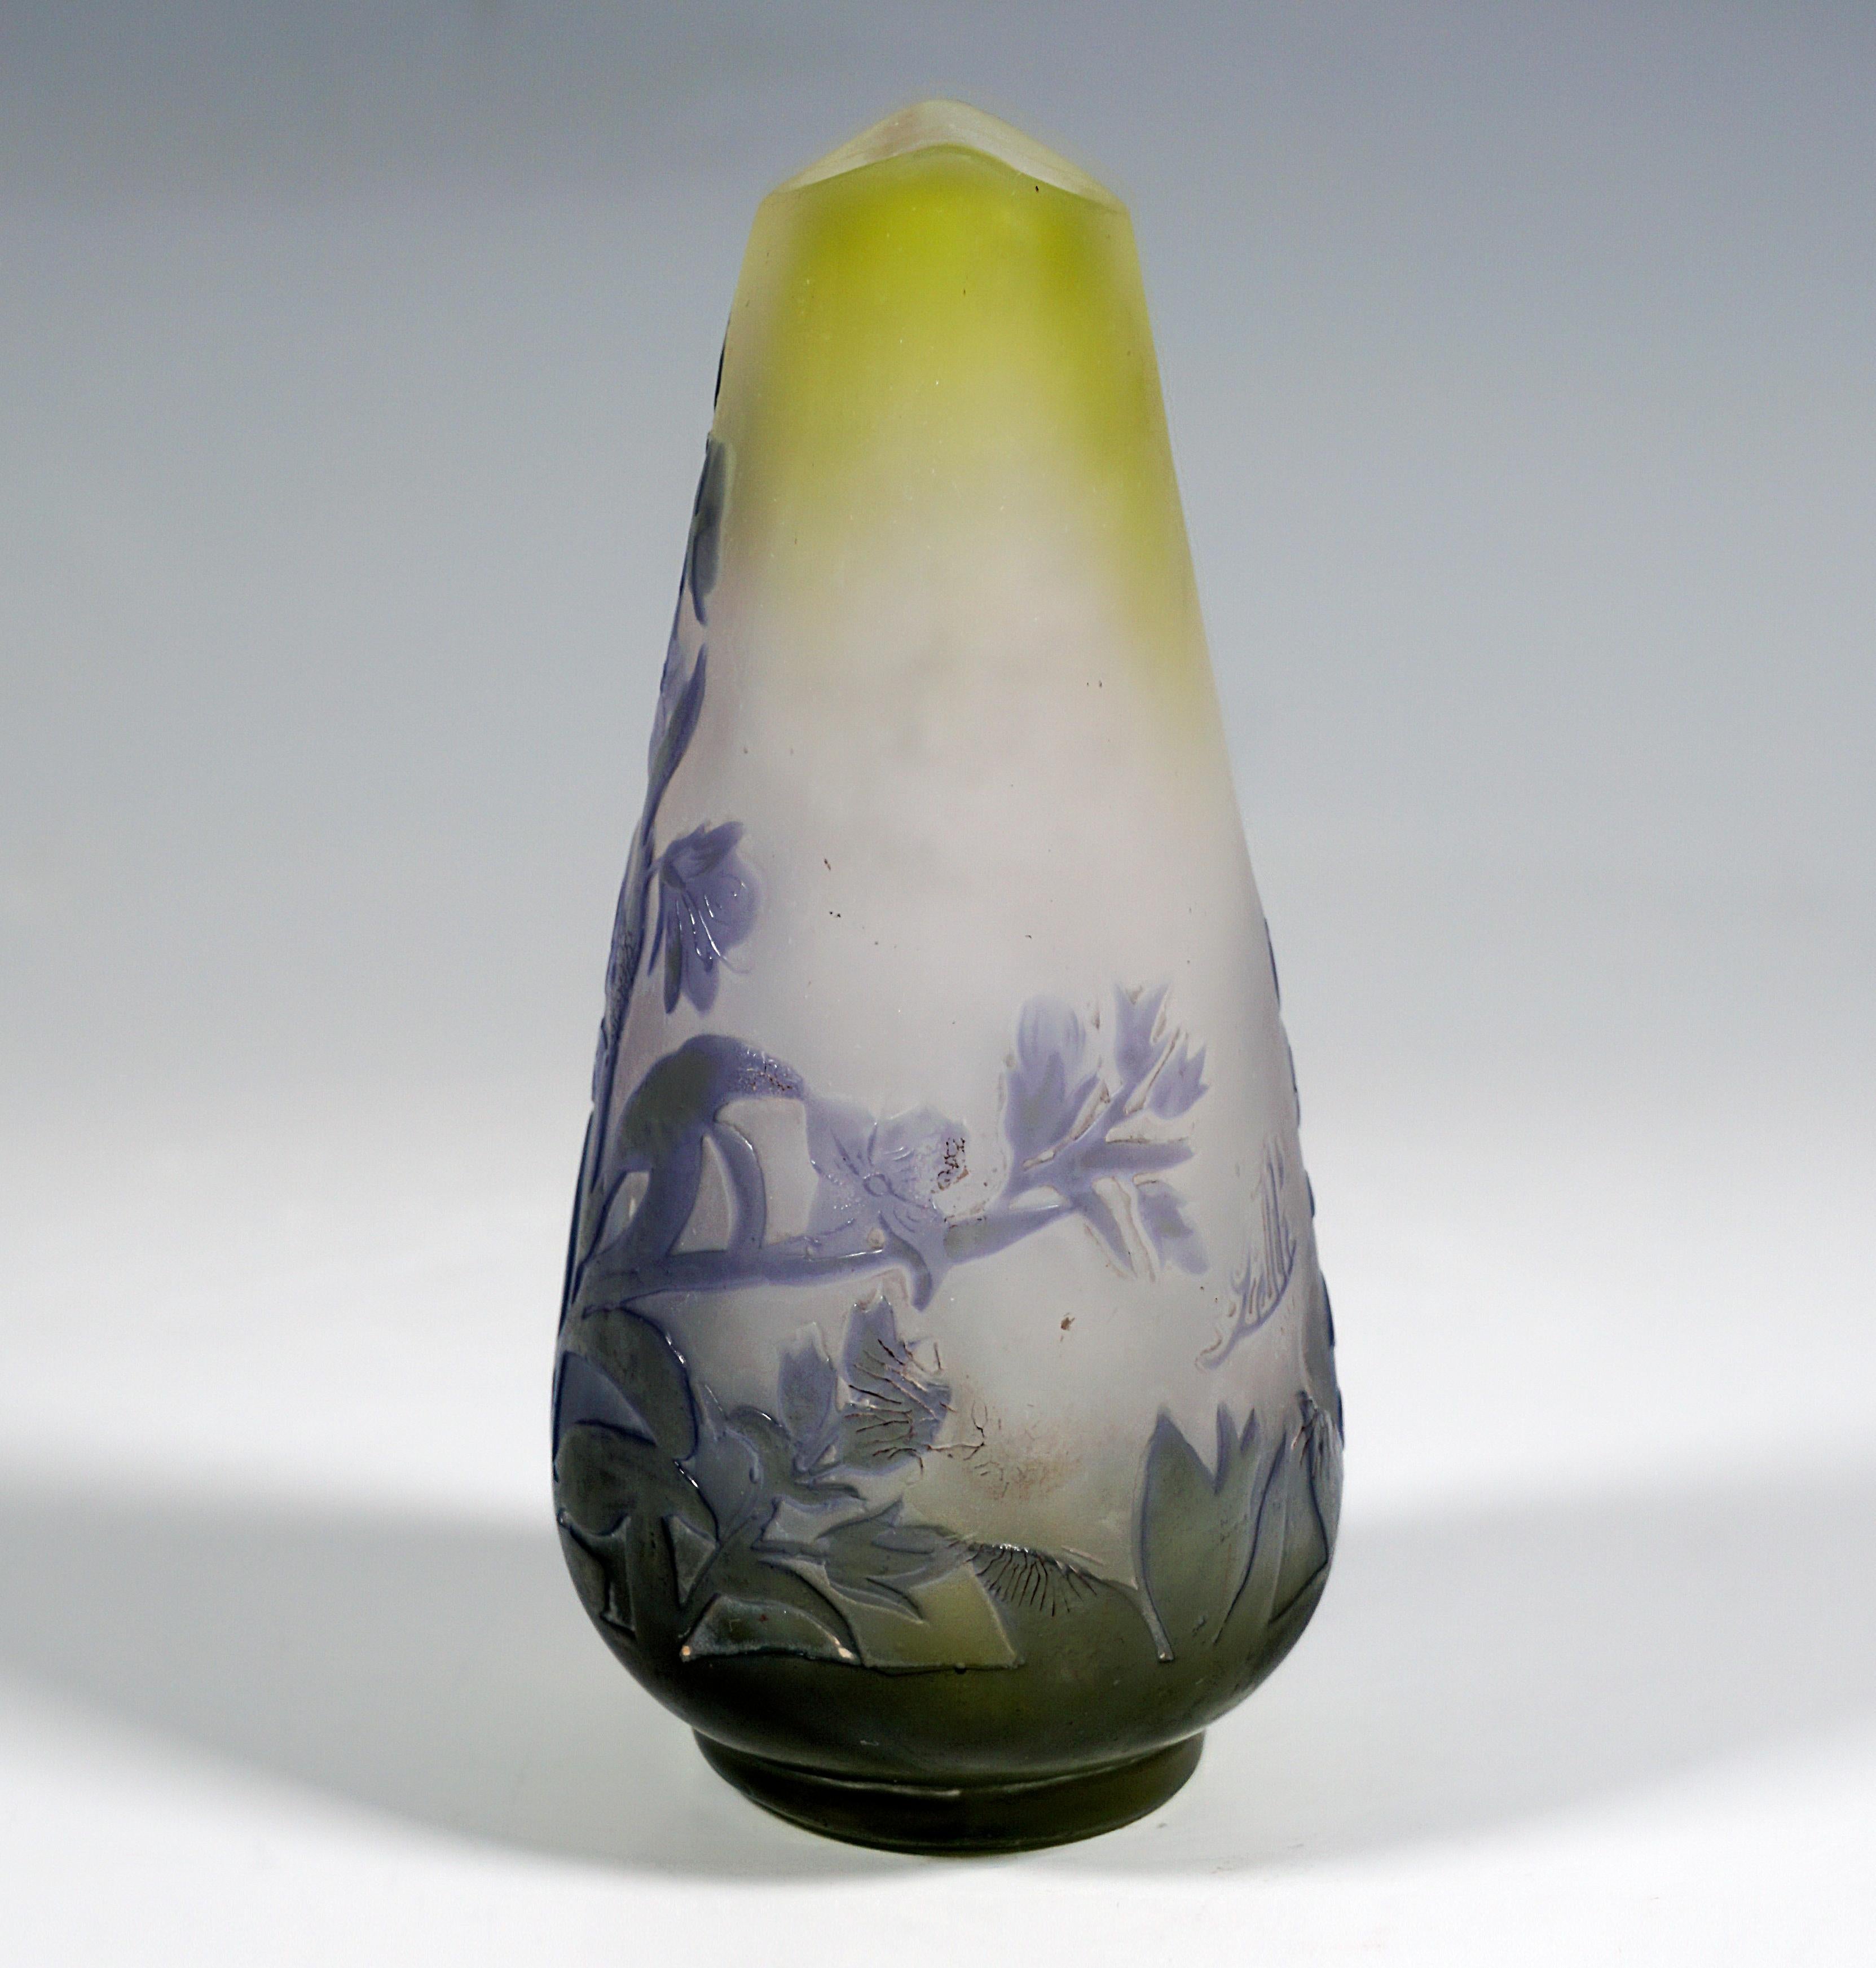 Vase in the shape of a drop: on an oval ground plan on a separate, flat stand, bulbous widening, then slowly narrowing to a small opening with points raised at the sides, colorless glass with yellow-green colored powder inclusions in the upper area,